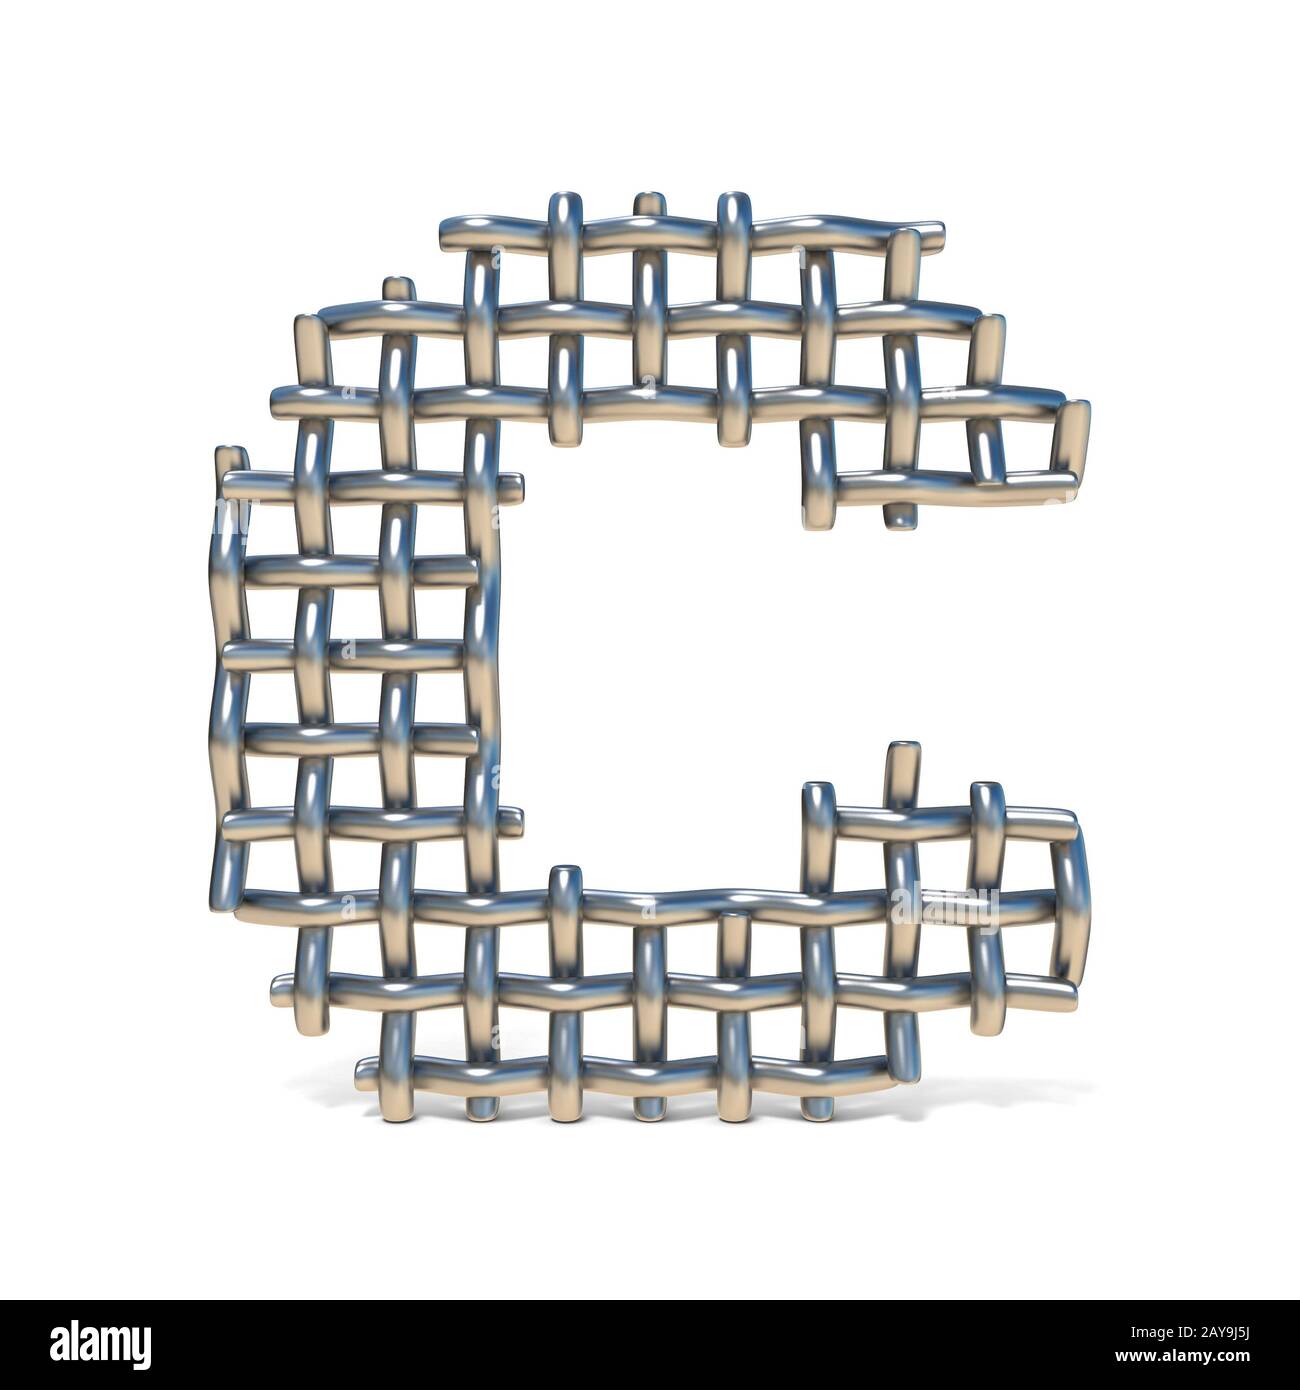 Metal wire mesh font LETTER C 3D Stock Photo - Alamy